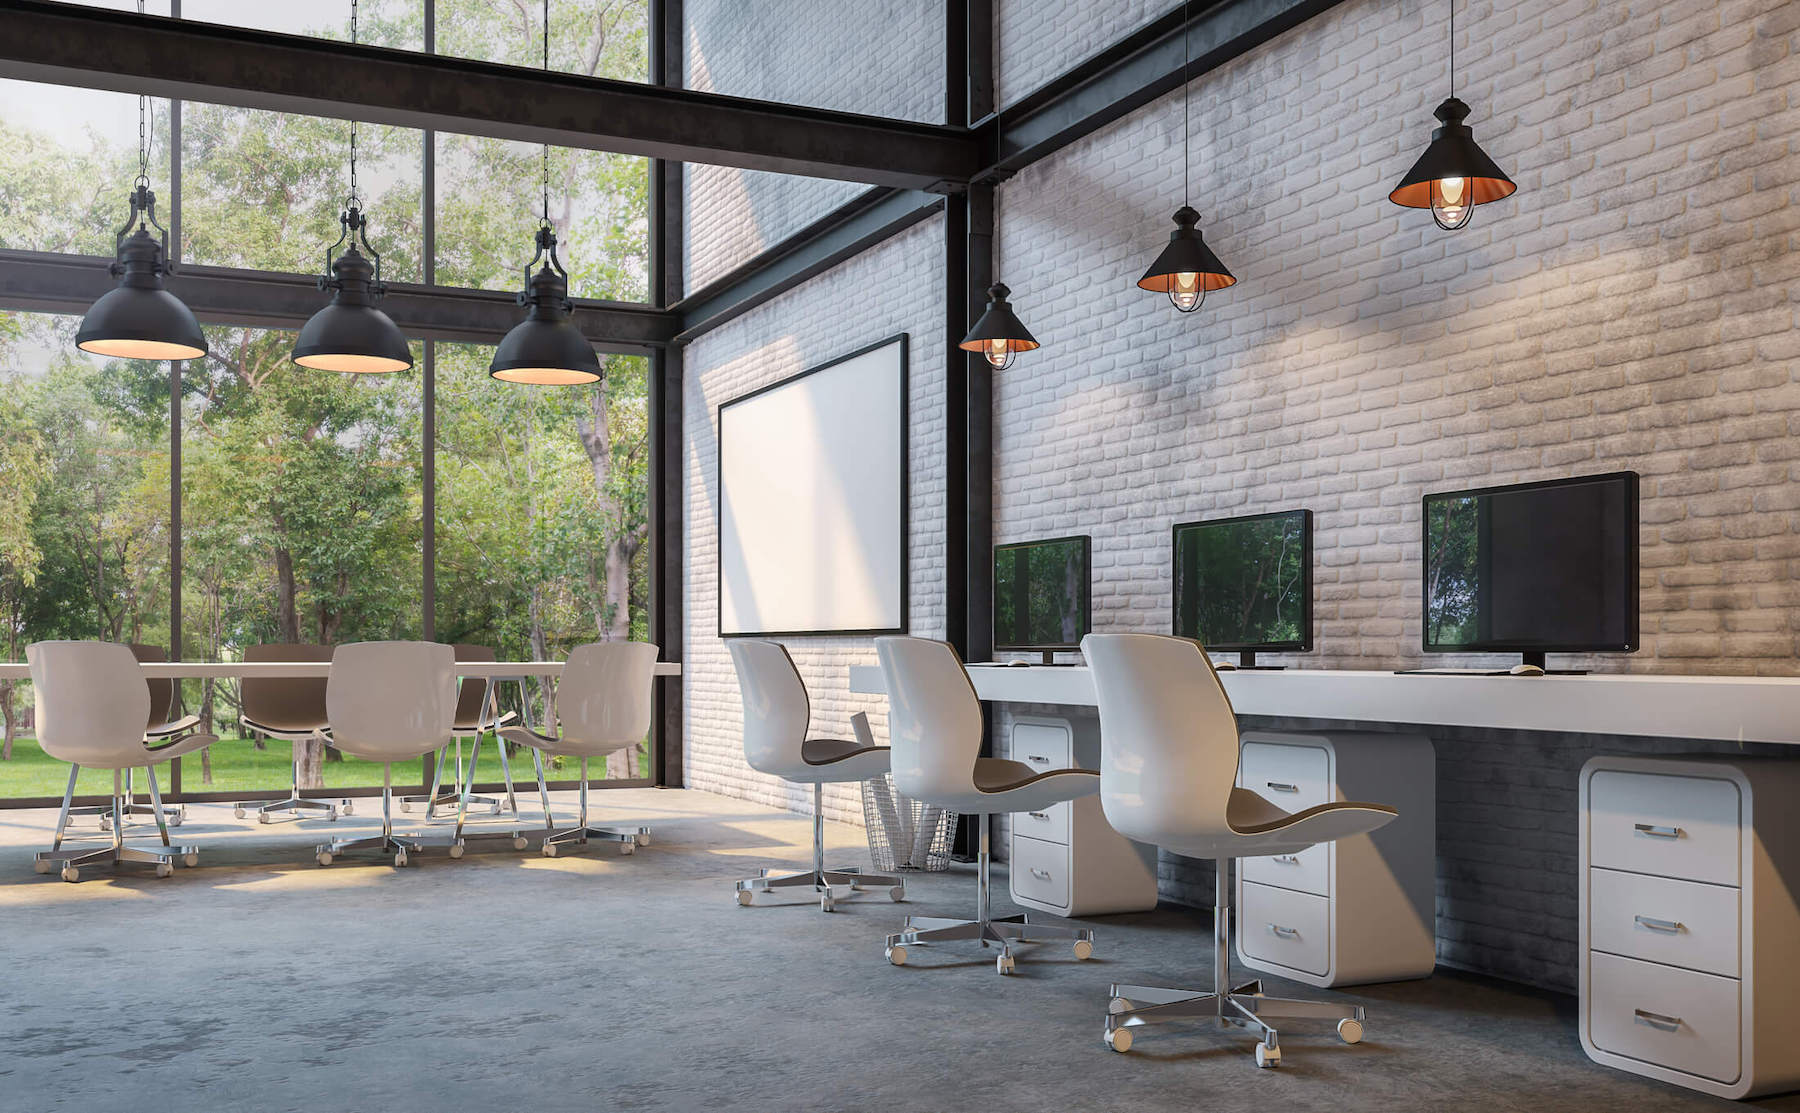 An open office concept with a presentation area and bar-style workstations, featuring brick walls and natural light.